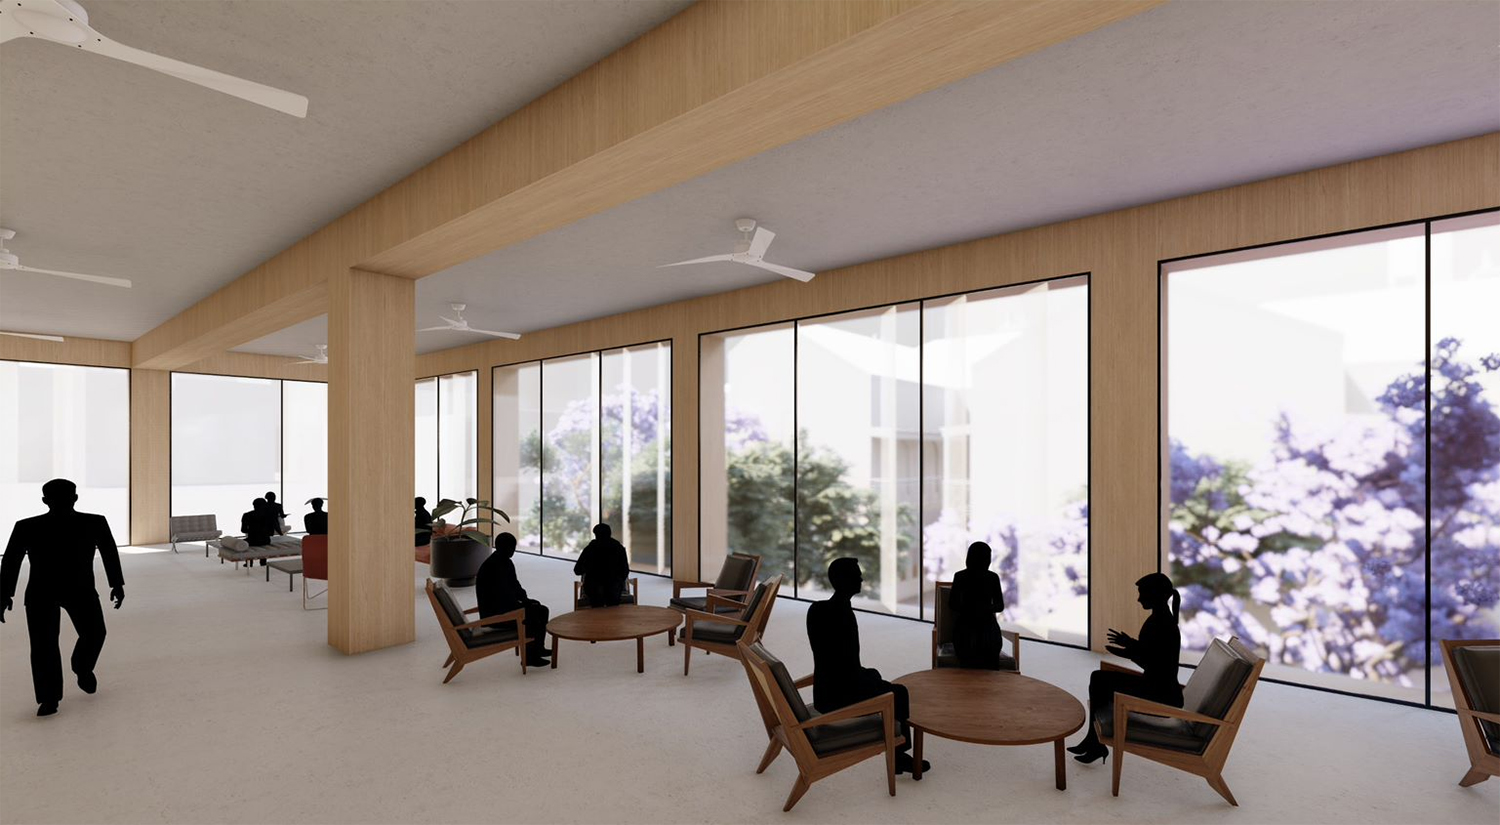 Dedicated discussion and networking spaces within the building. 